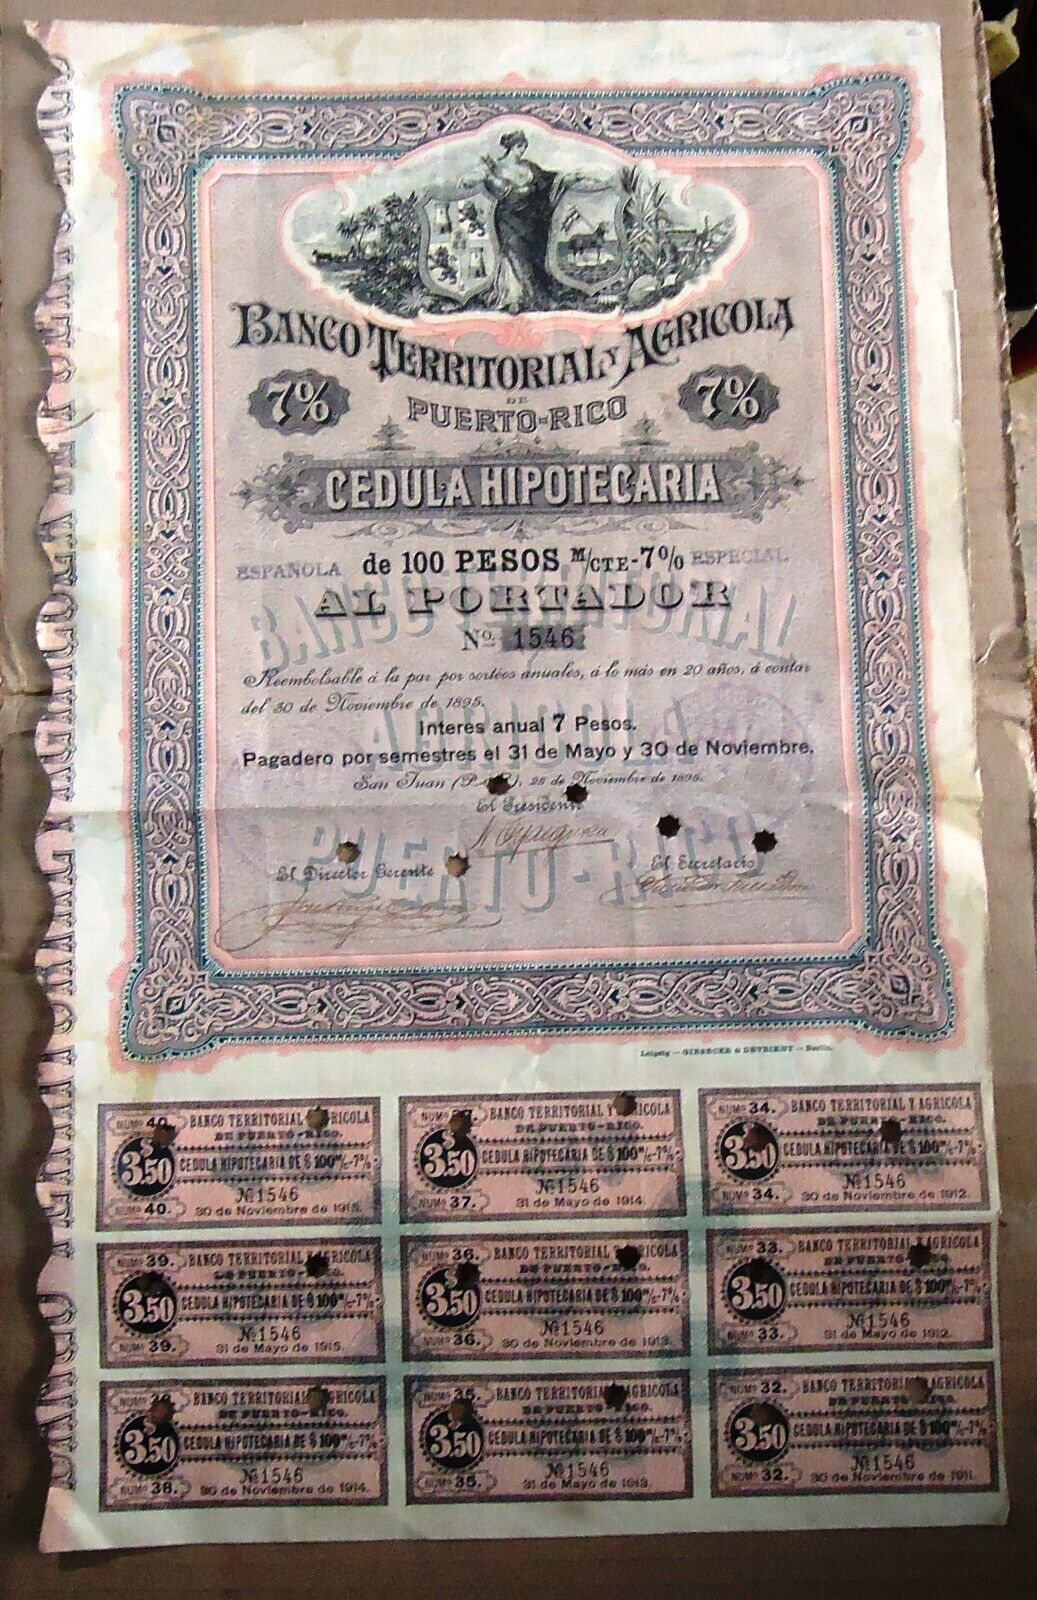 1895 Banco Territorial Agricola of Puerto Rico Bond with 9 coupons